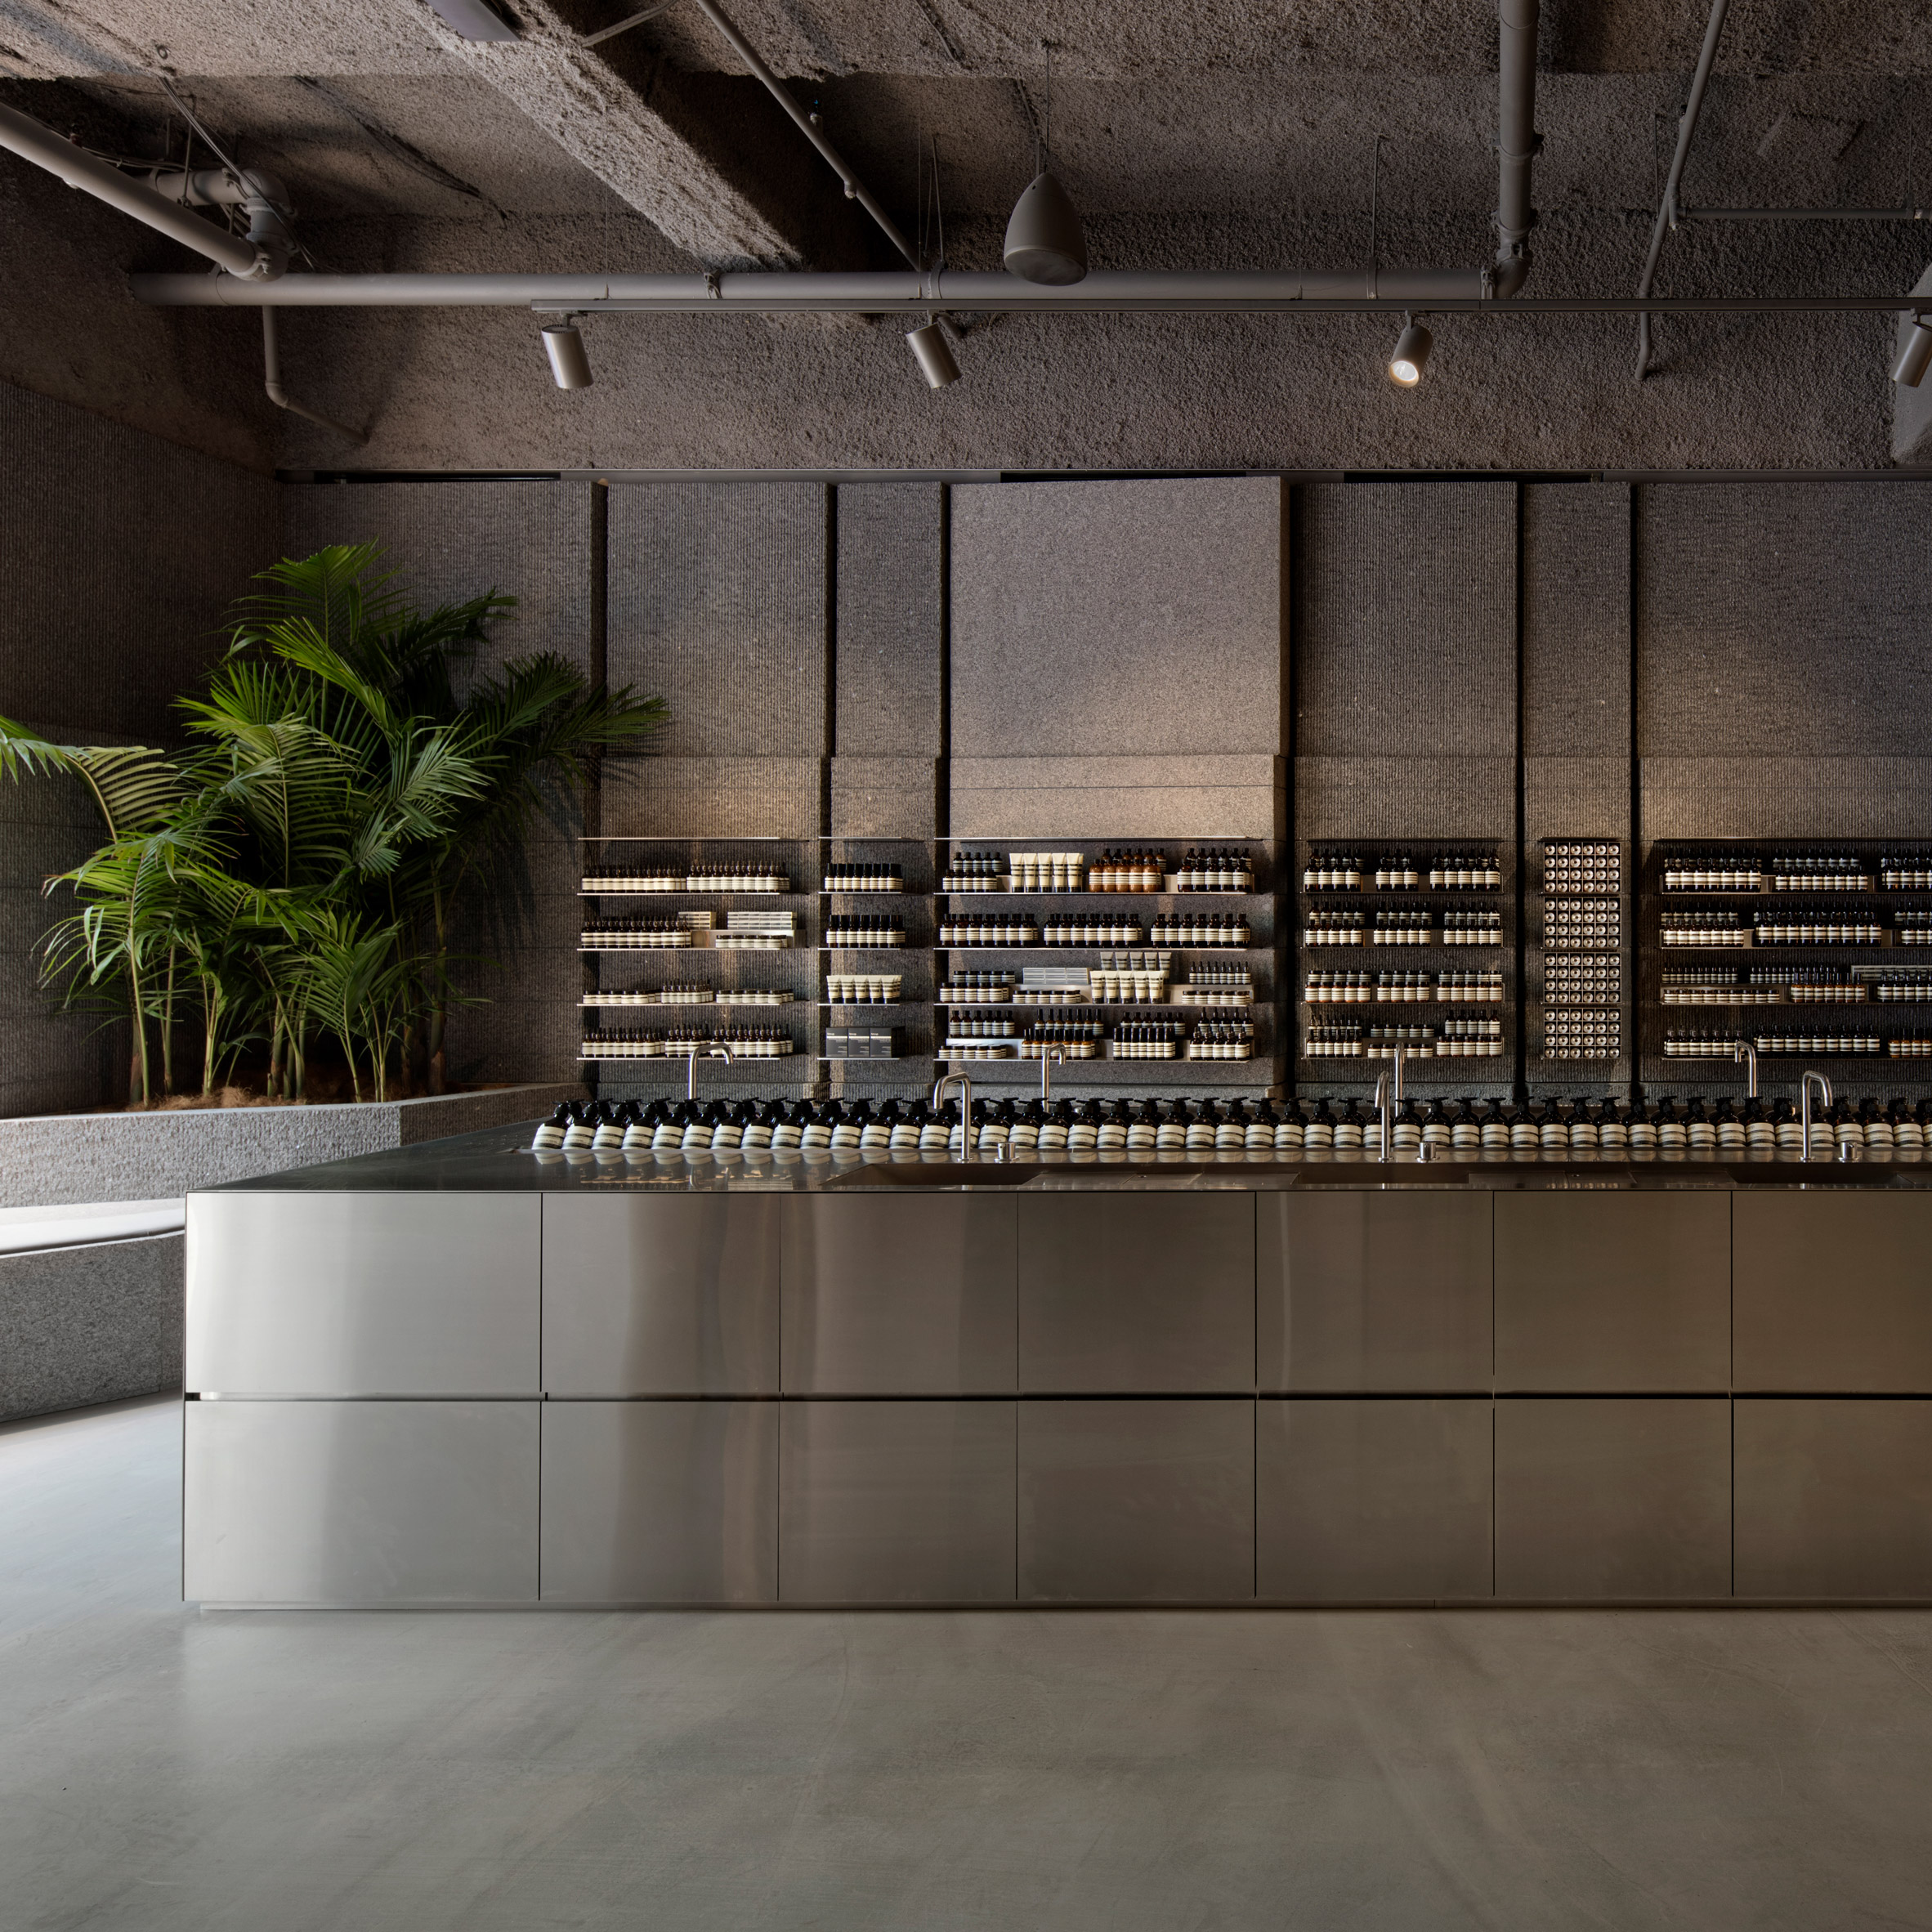 Top jobs in New York: Store design and construction manager at Aesop in New York, USA